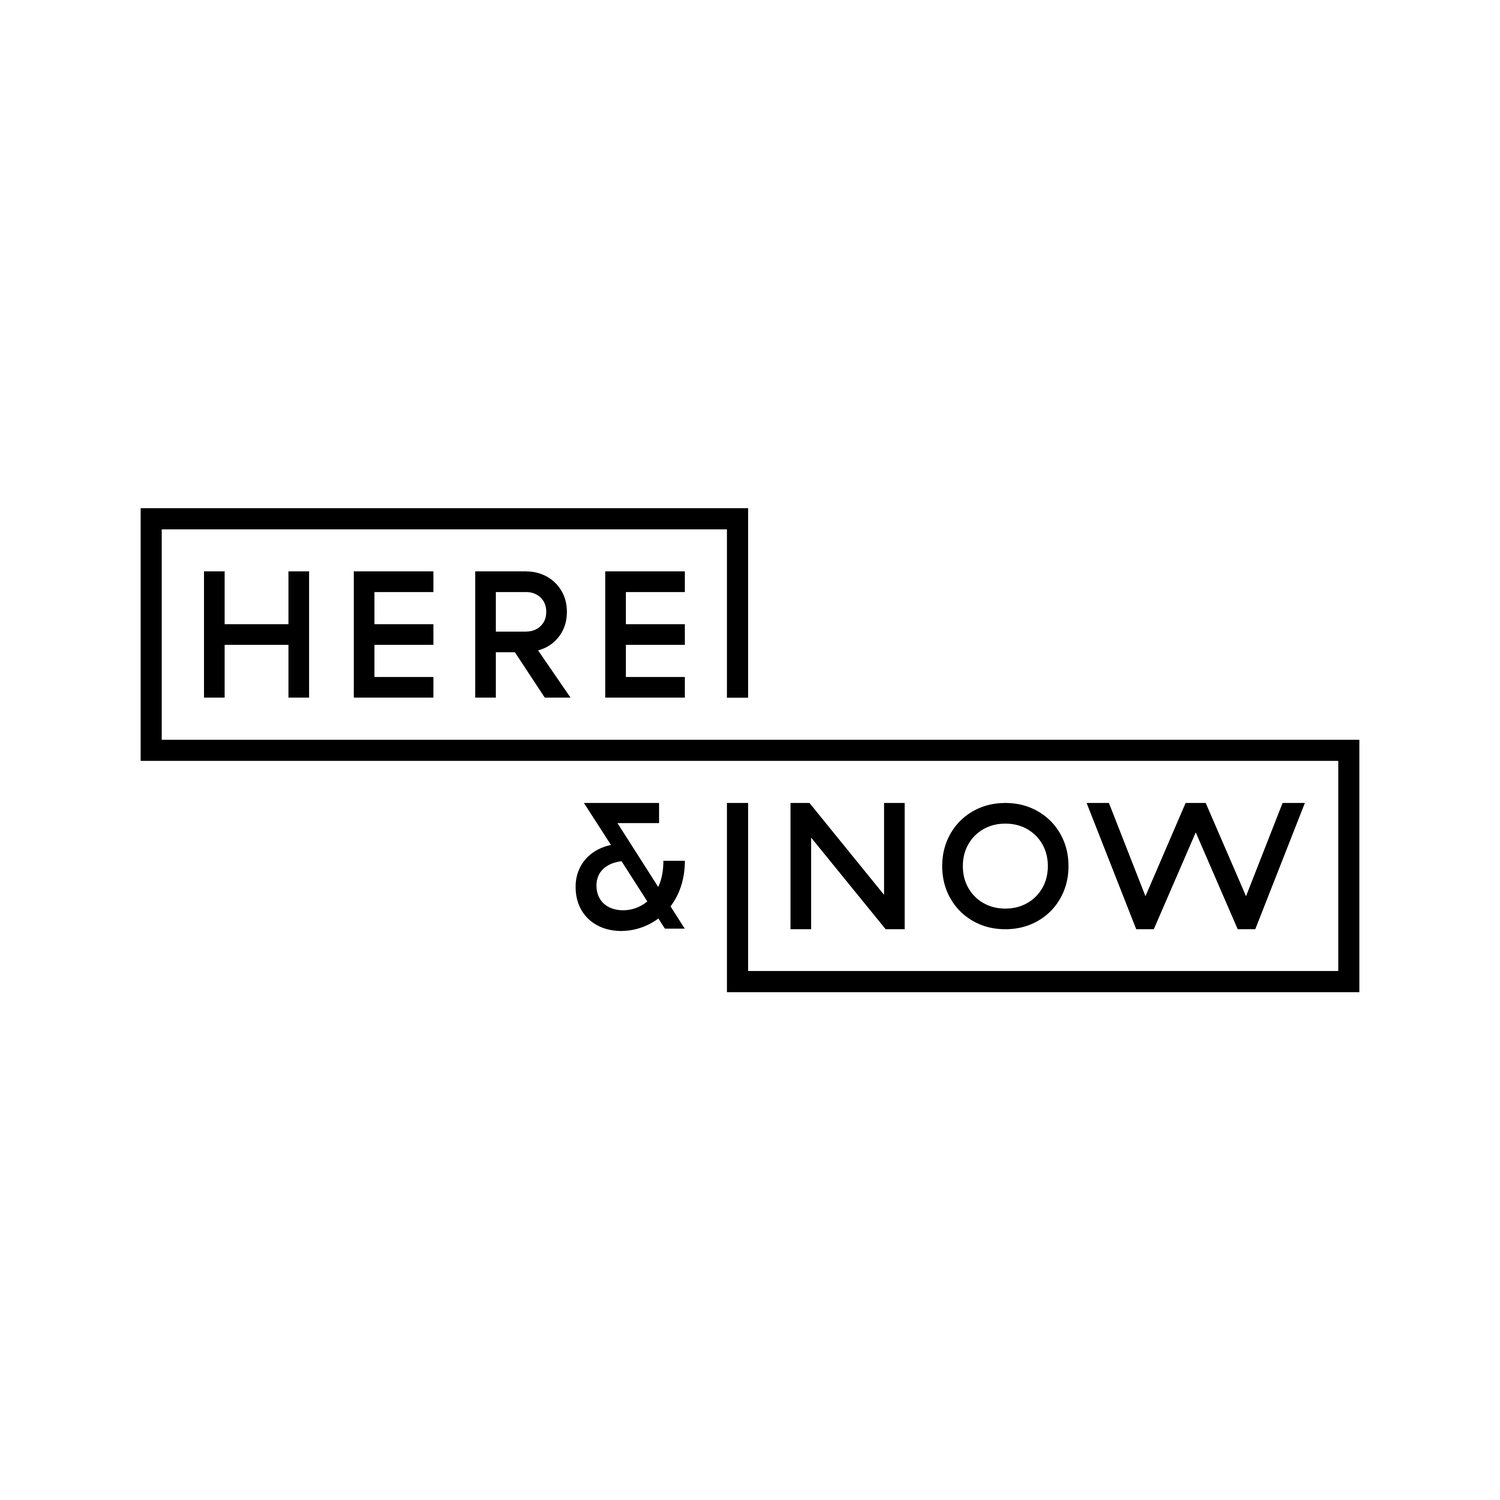 Here & Now Recordings independent record label based in Woking, UK, releasing music by grammy nominated and hit artists